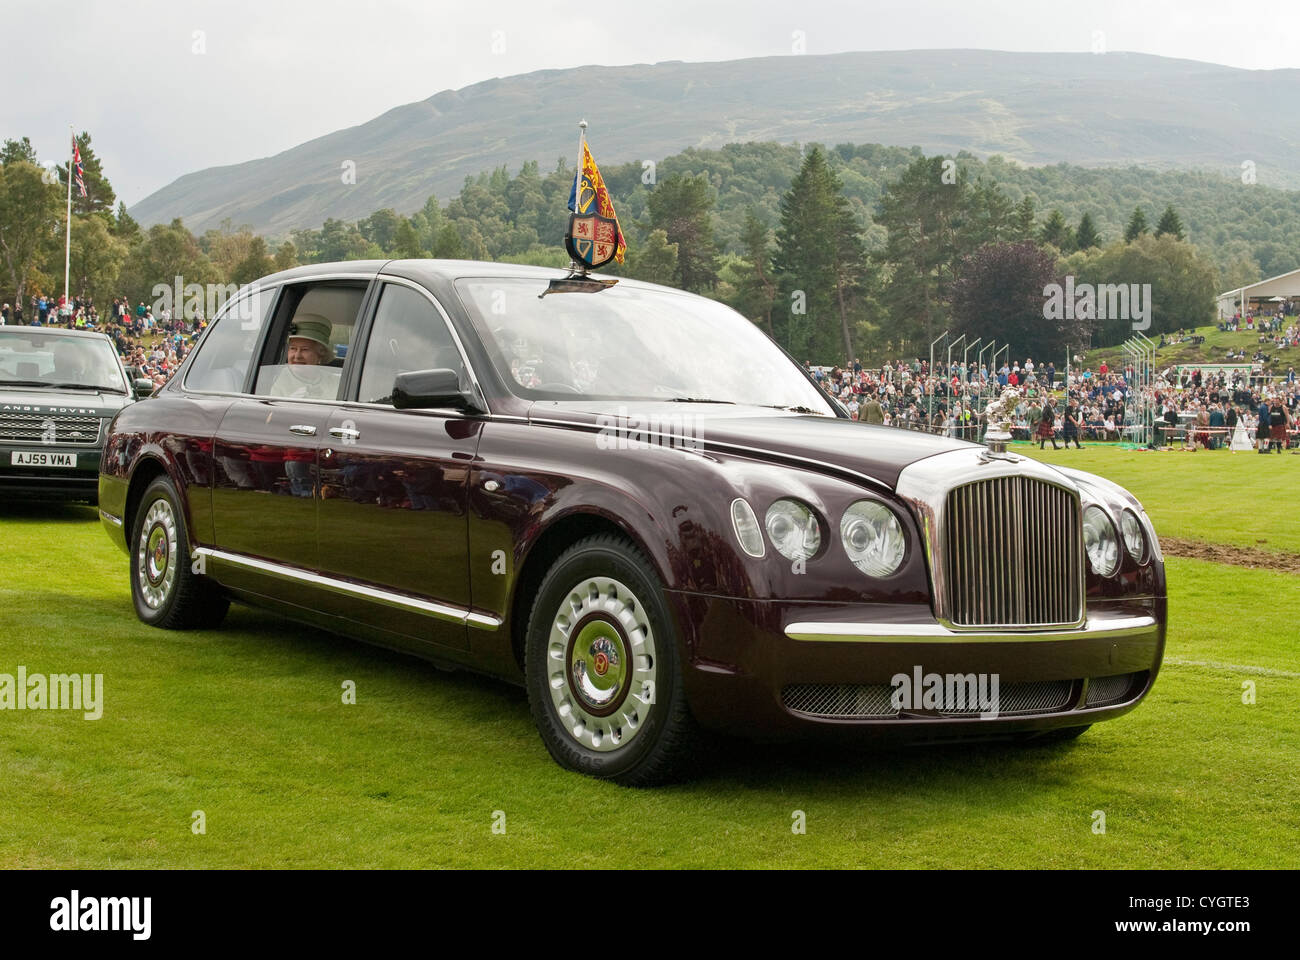 Queen in Rolls Royce at The Braemar Royal Highland Gathering Stock Photo